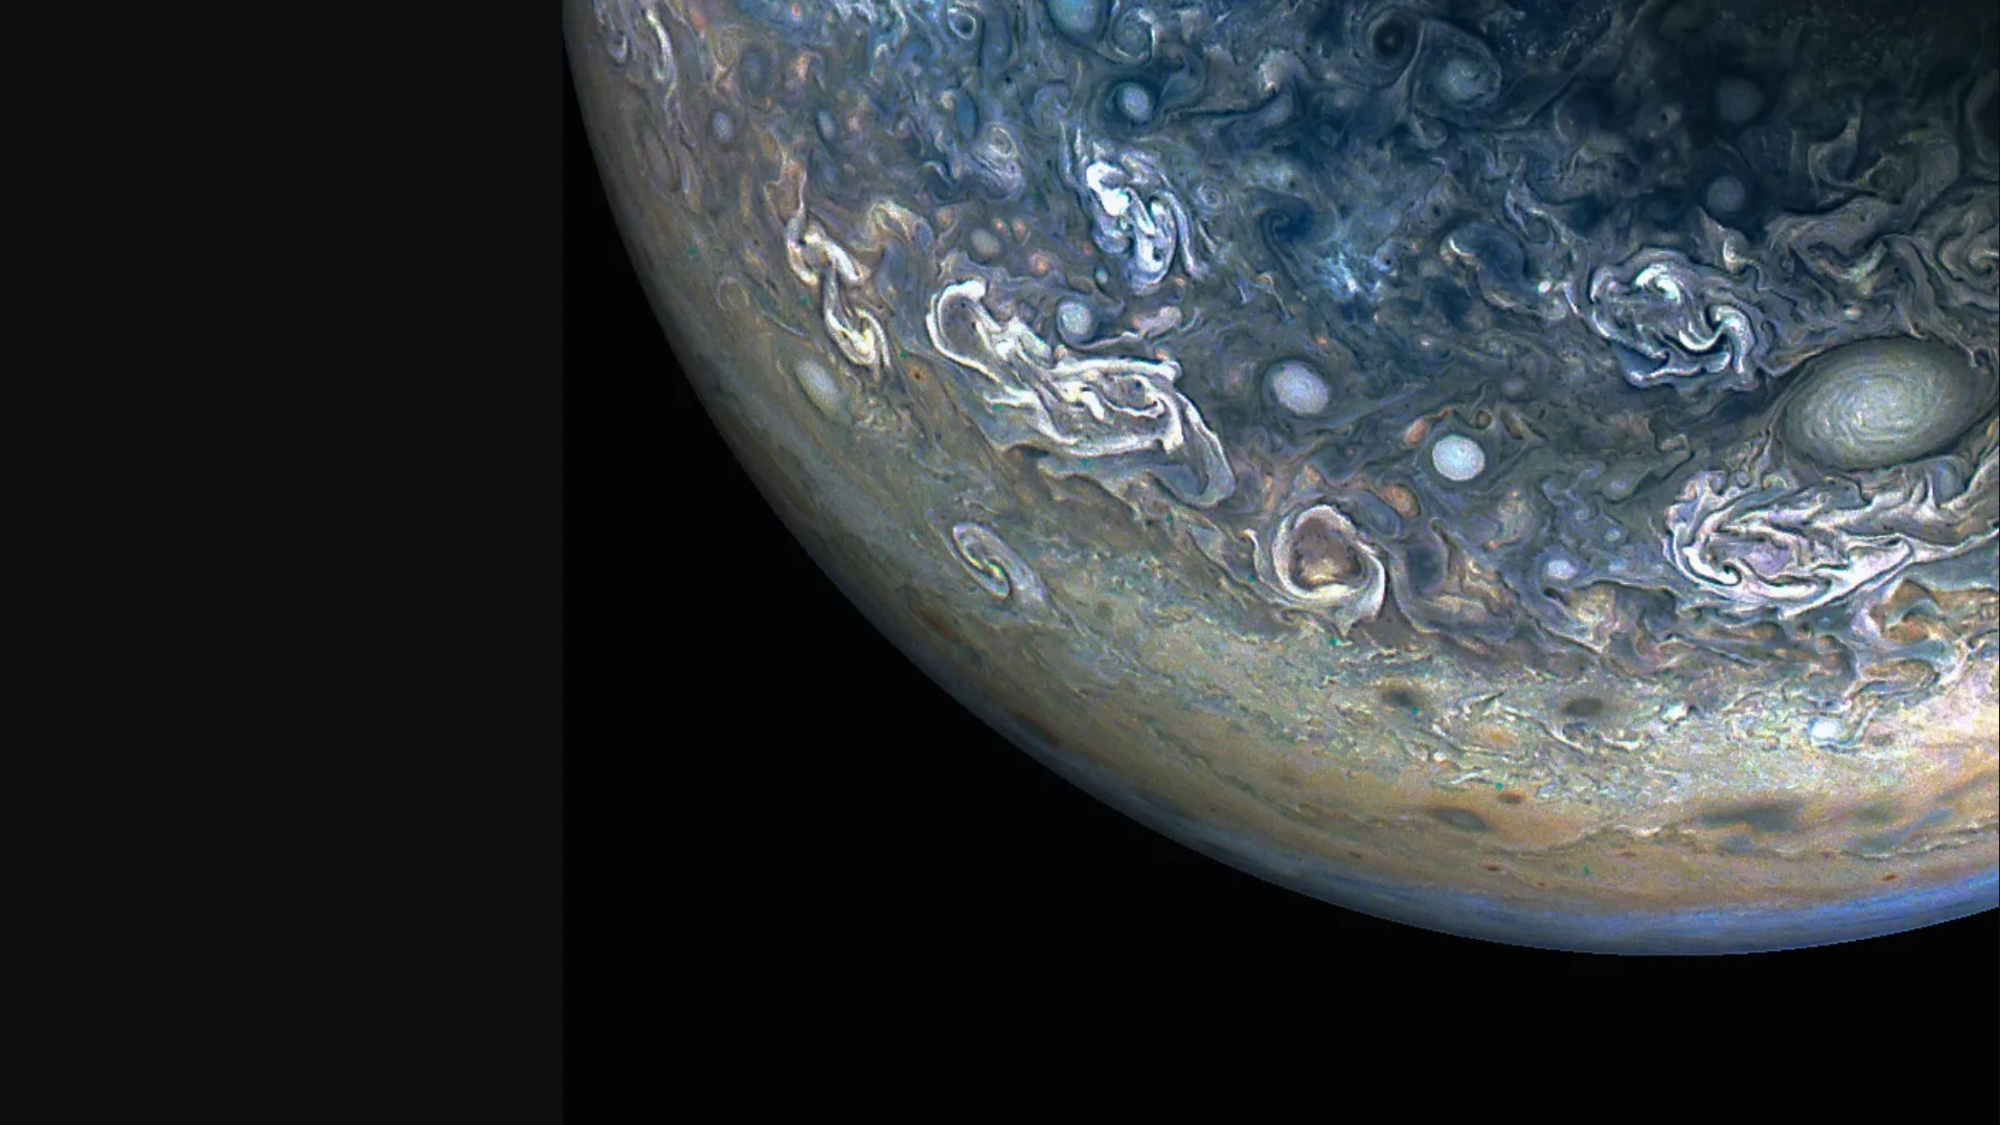 Jupiter’s surreal clouds swirl in new van Gogh-esque view from NASA’s Juno probe (photo) Space